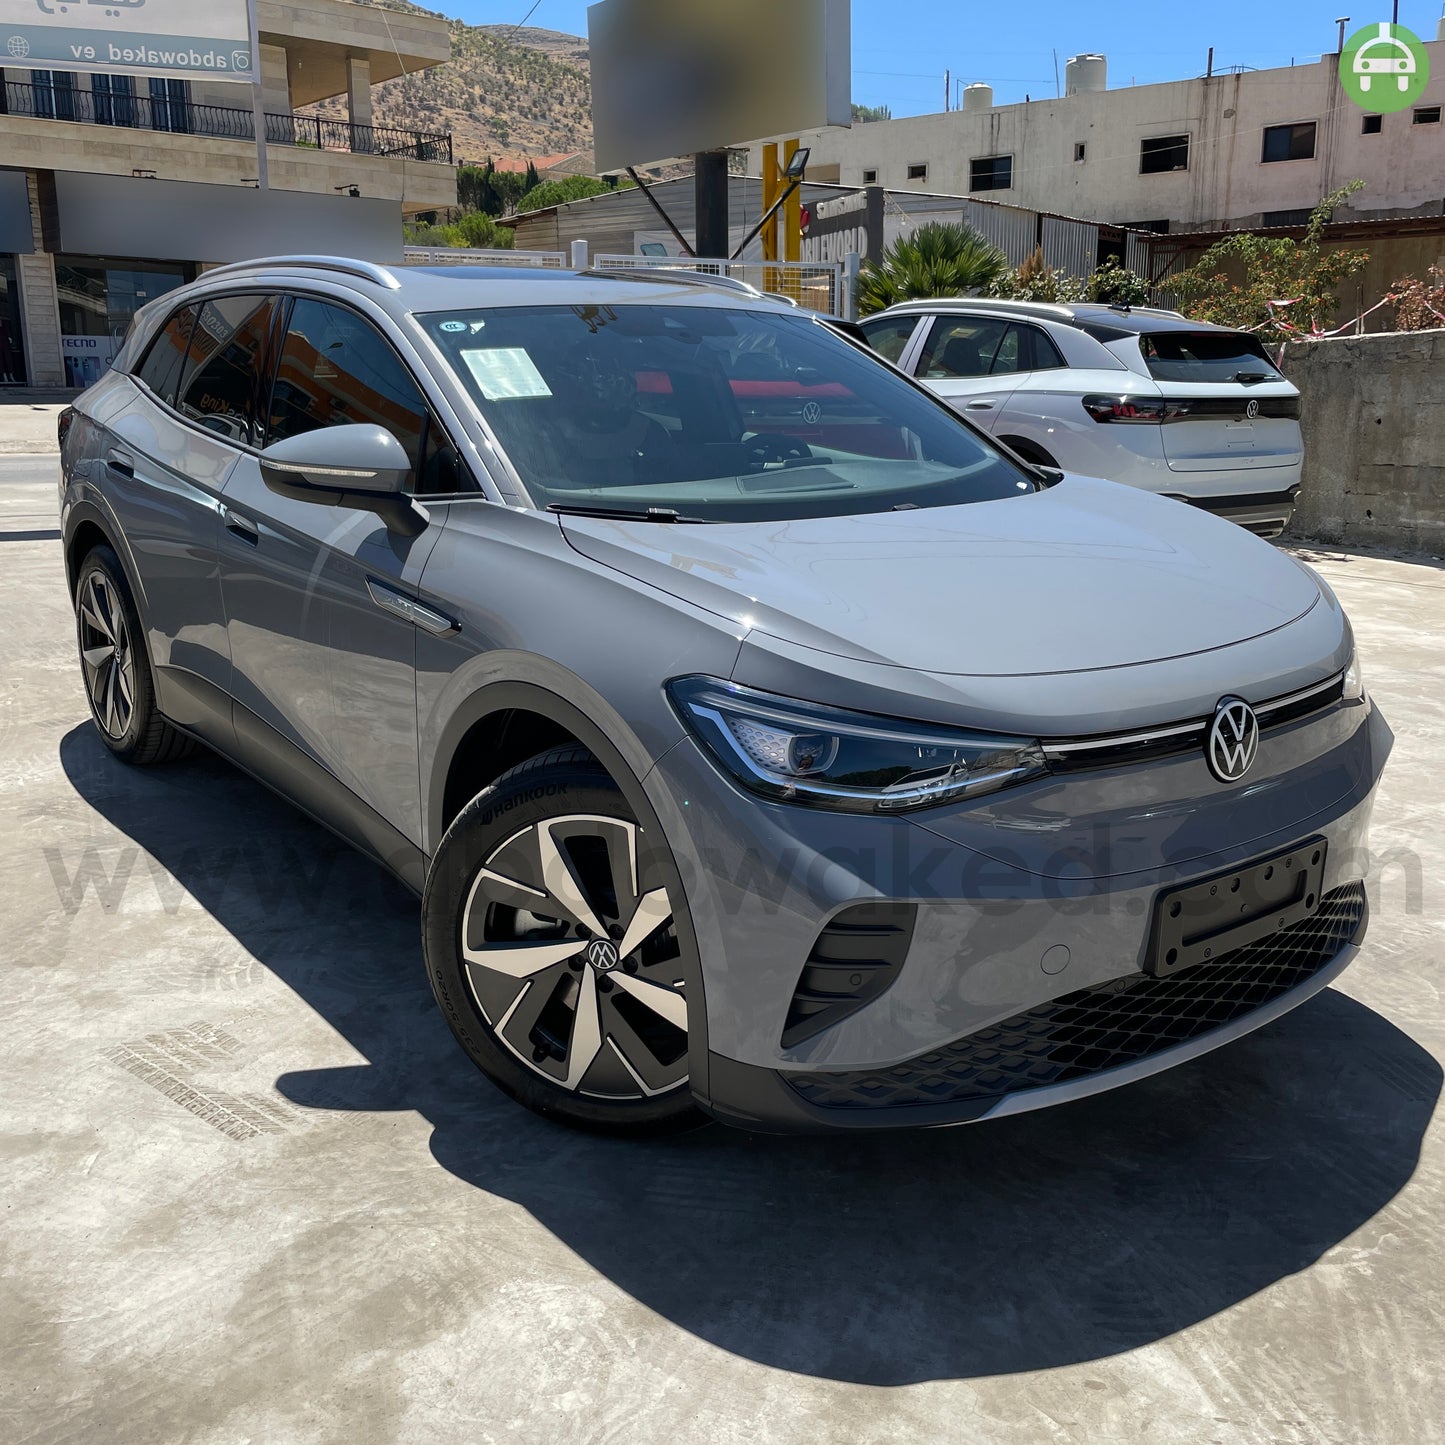 VW ID4 Crozz Pure+ 2022 Nardo Grey Color 550km Range/Charge Fully Electric Car (New - 0KM)